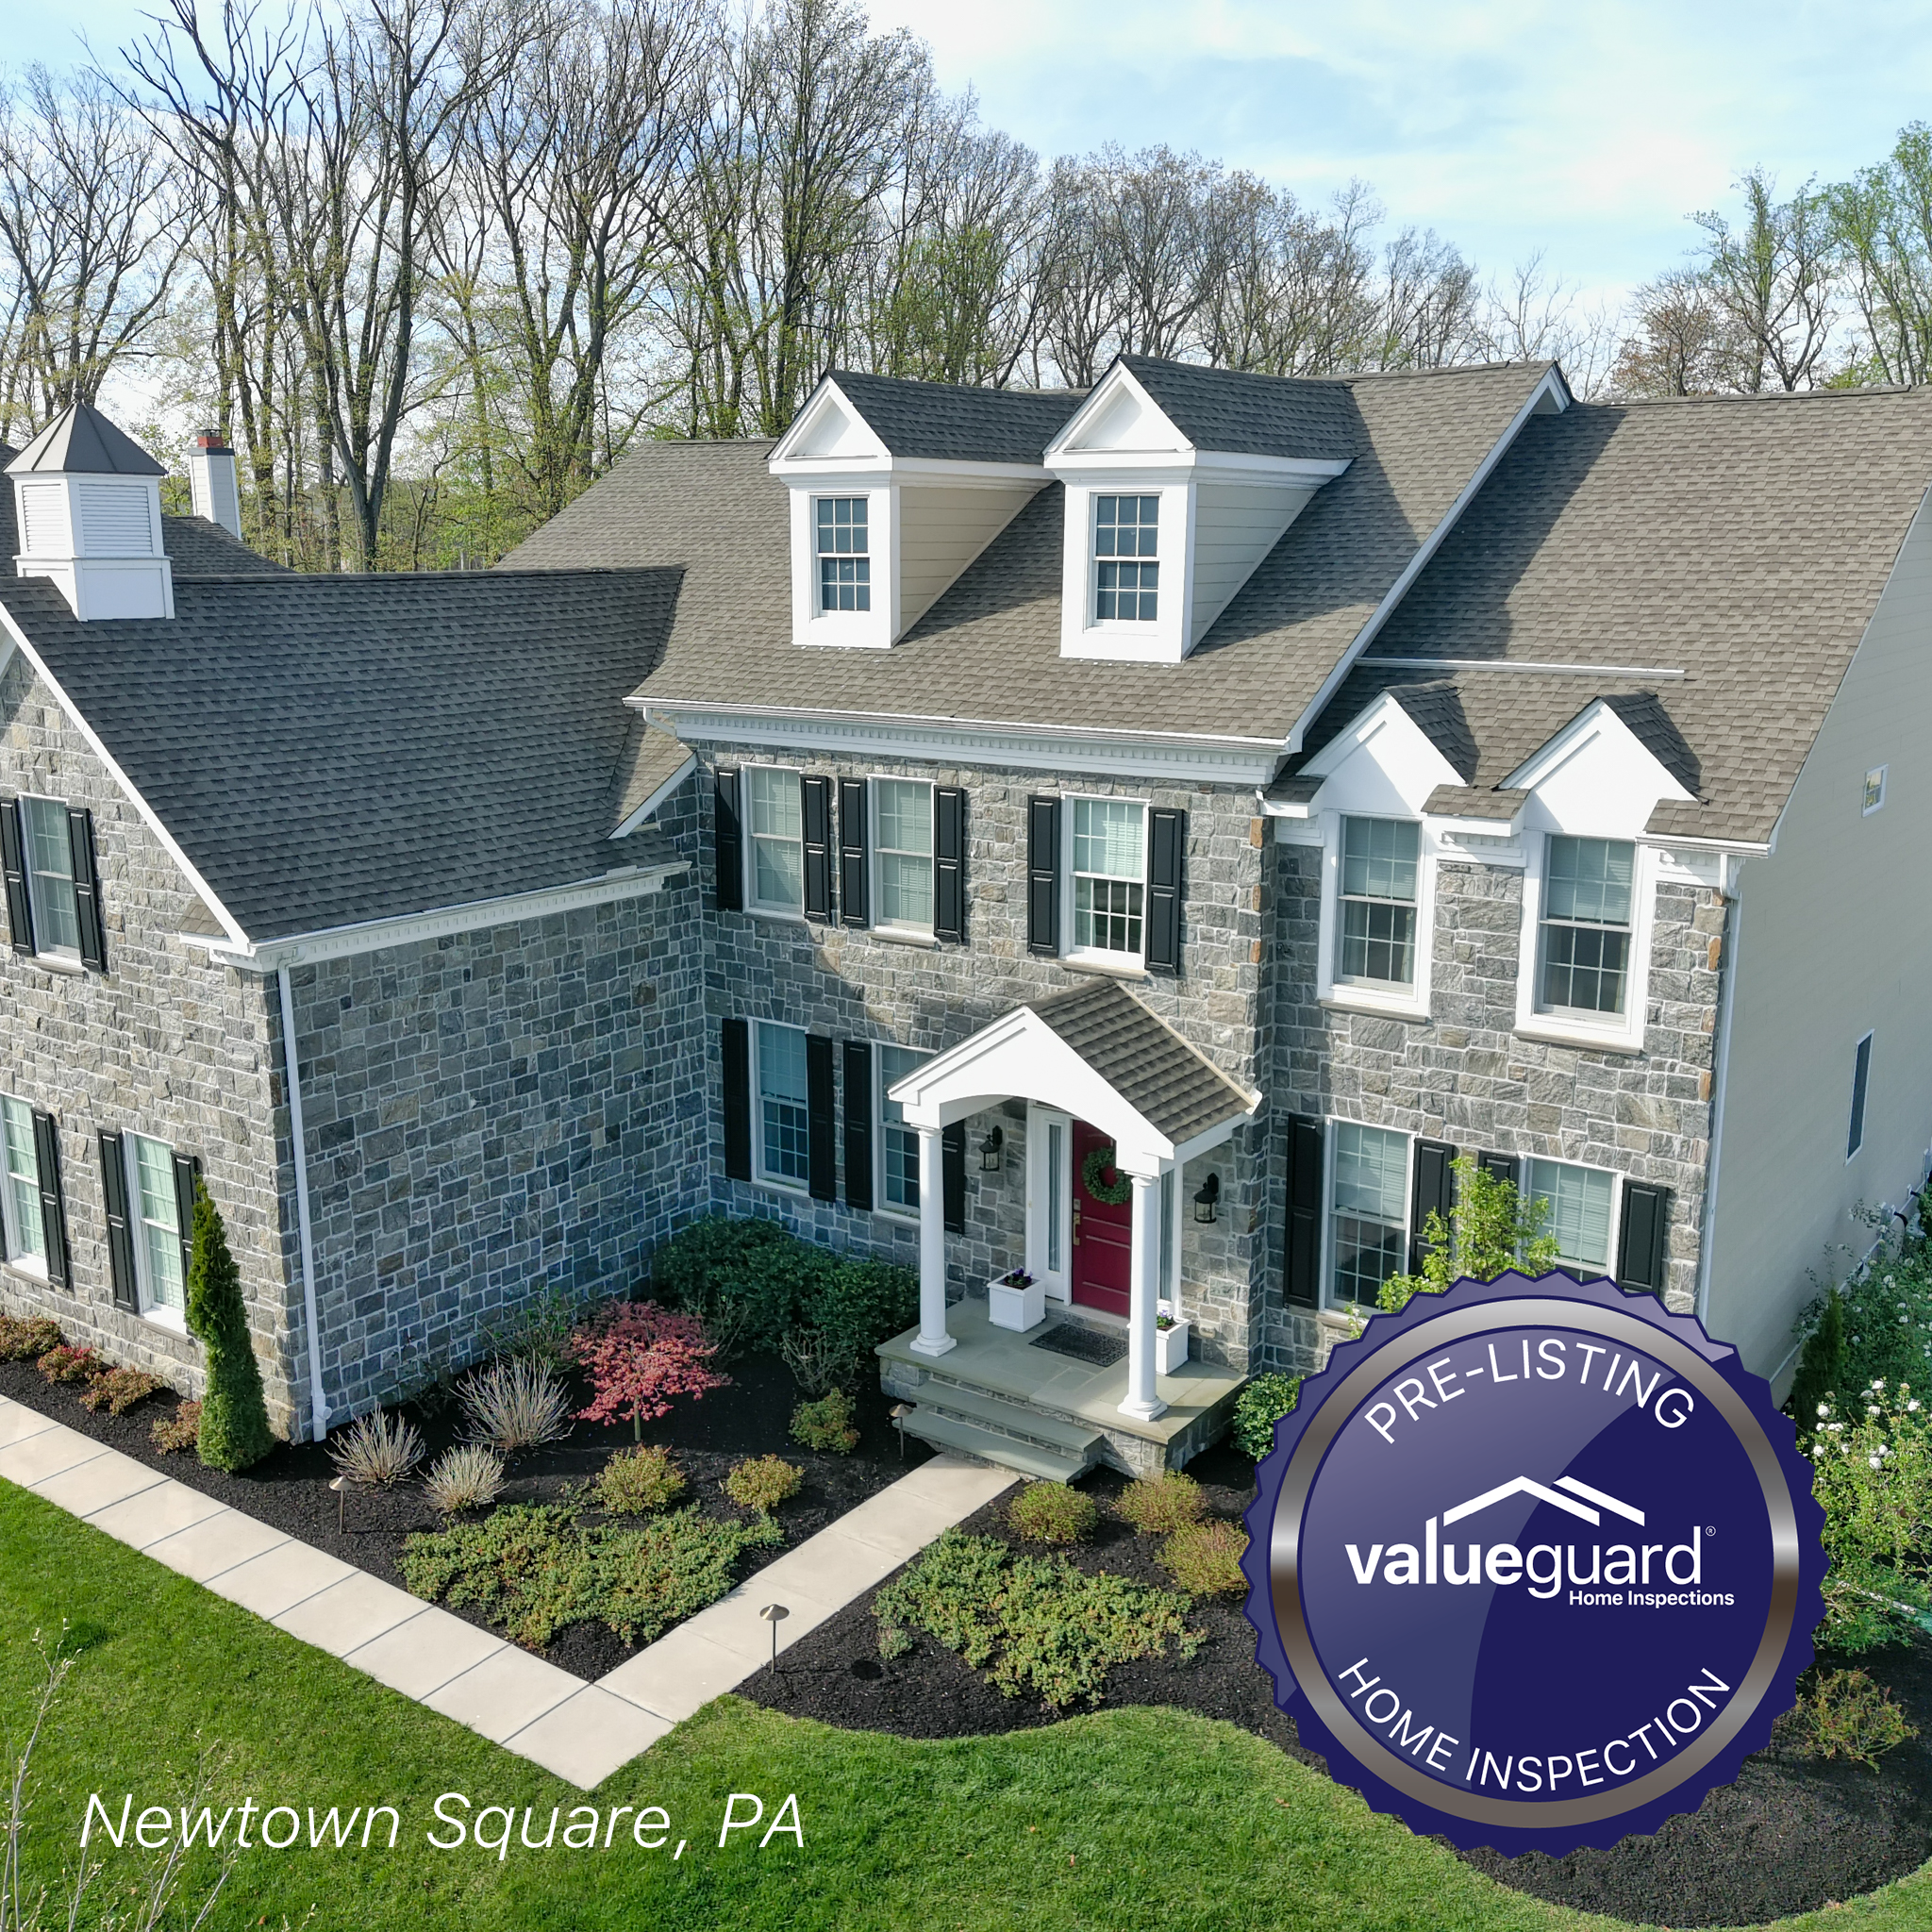 Pre-Listing Home Inspection in Newtown Square, PA